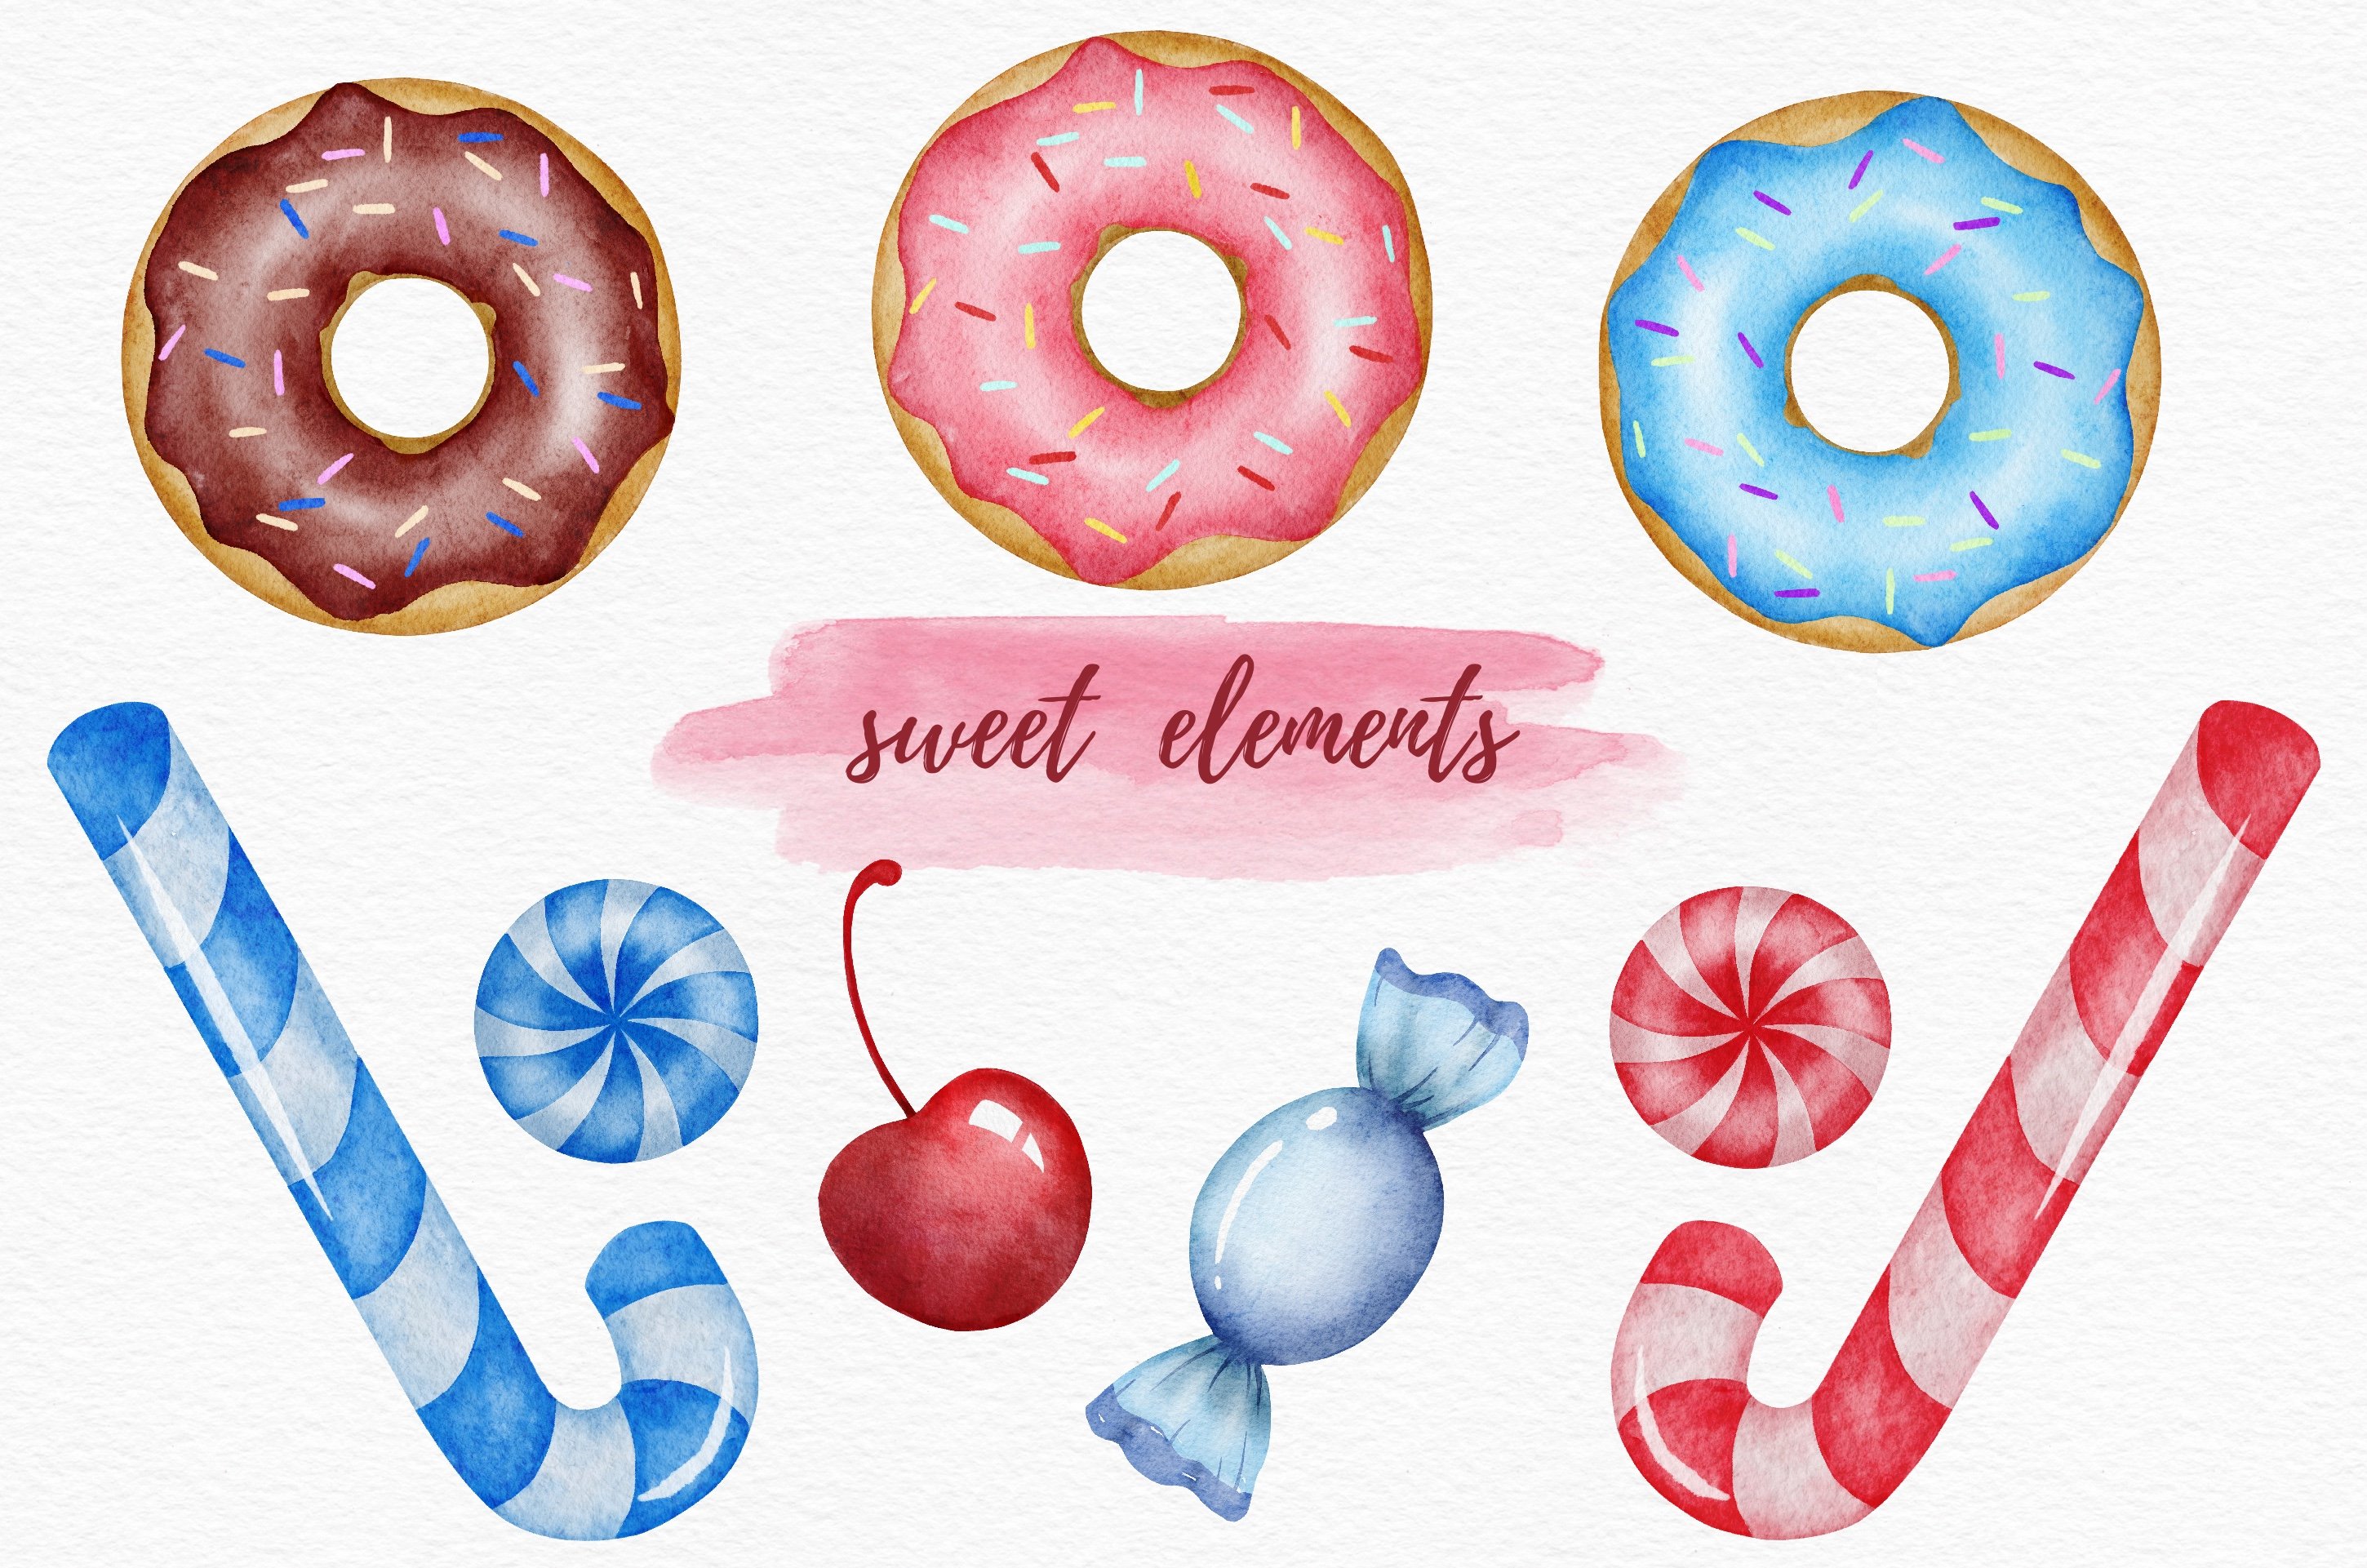 Some sweet elements for tasty clipart.